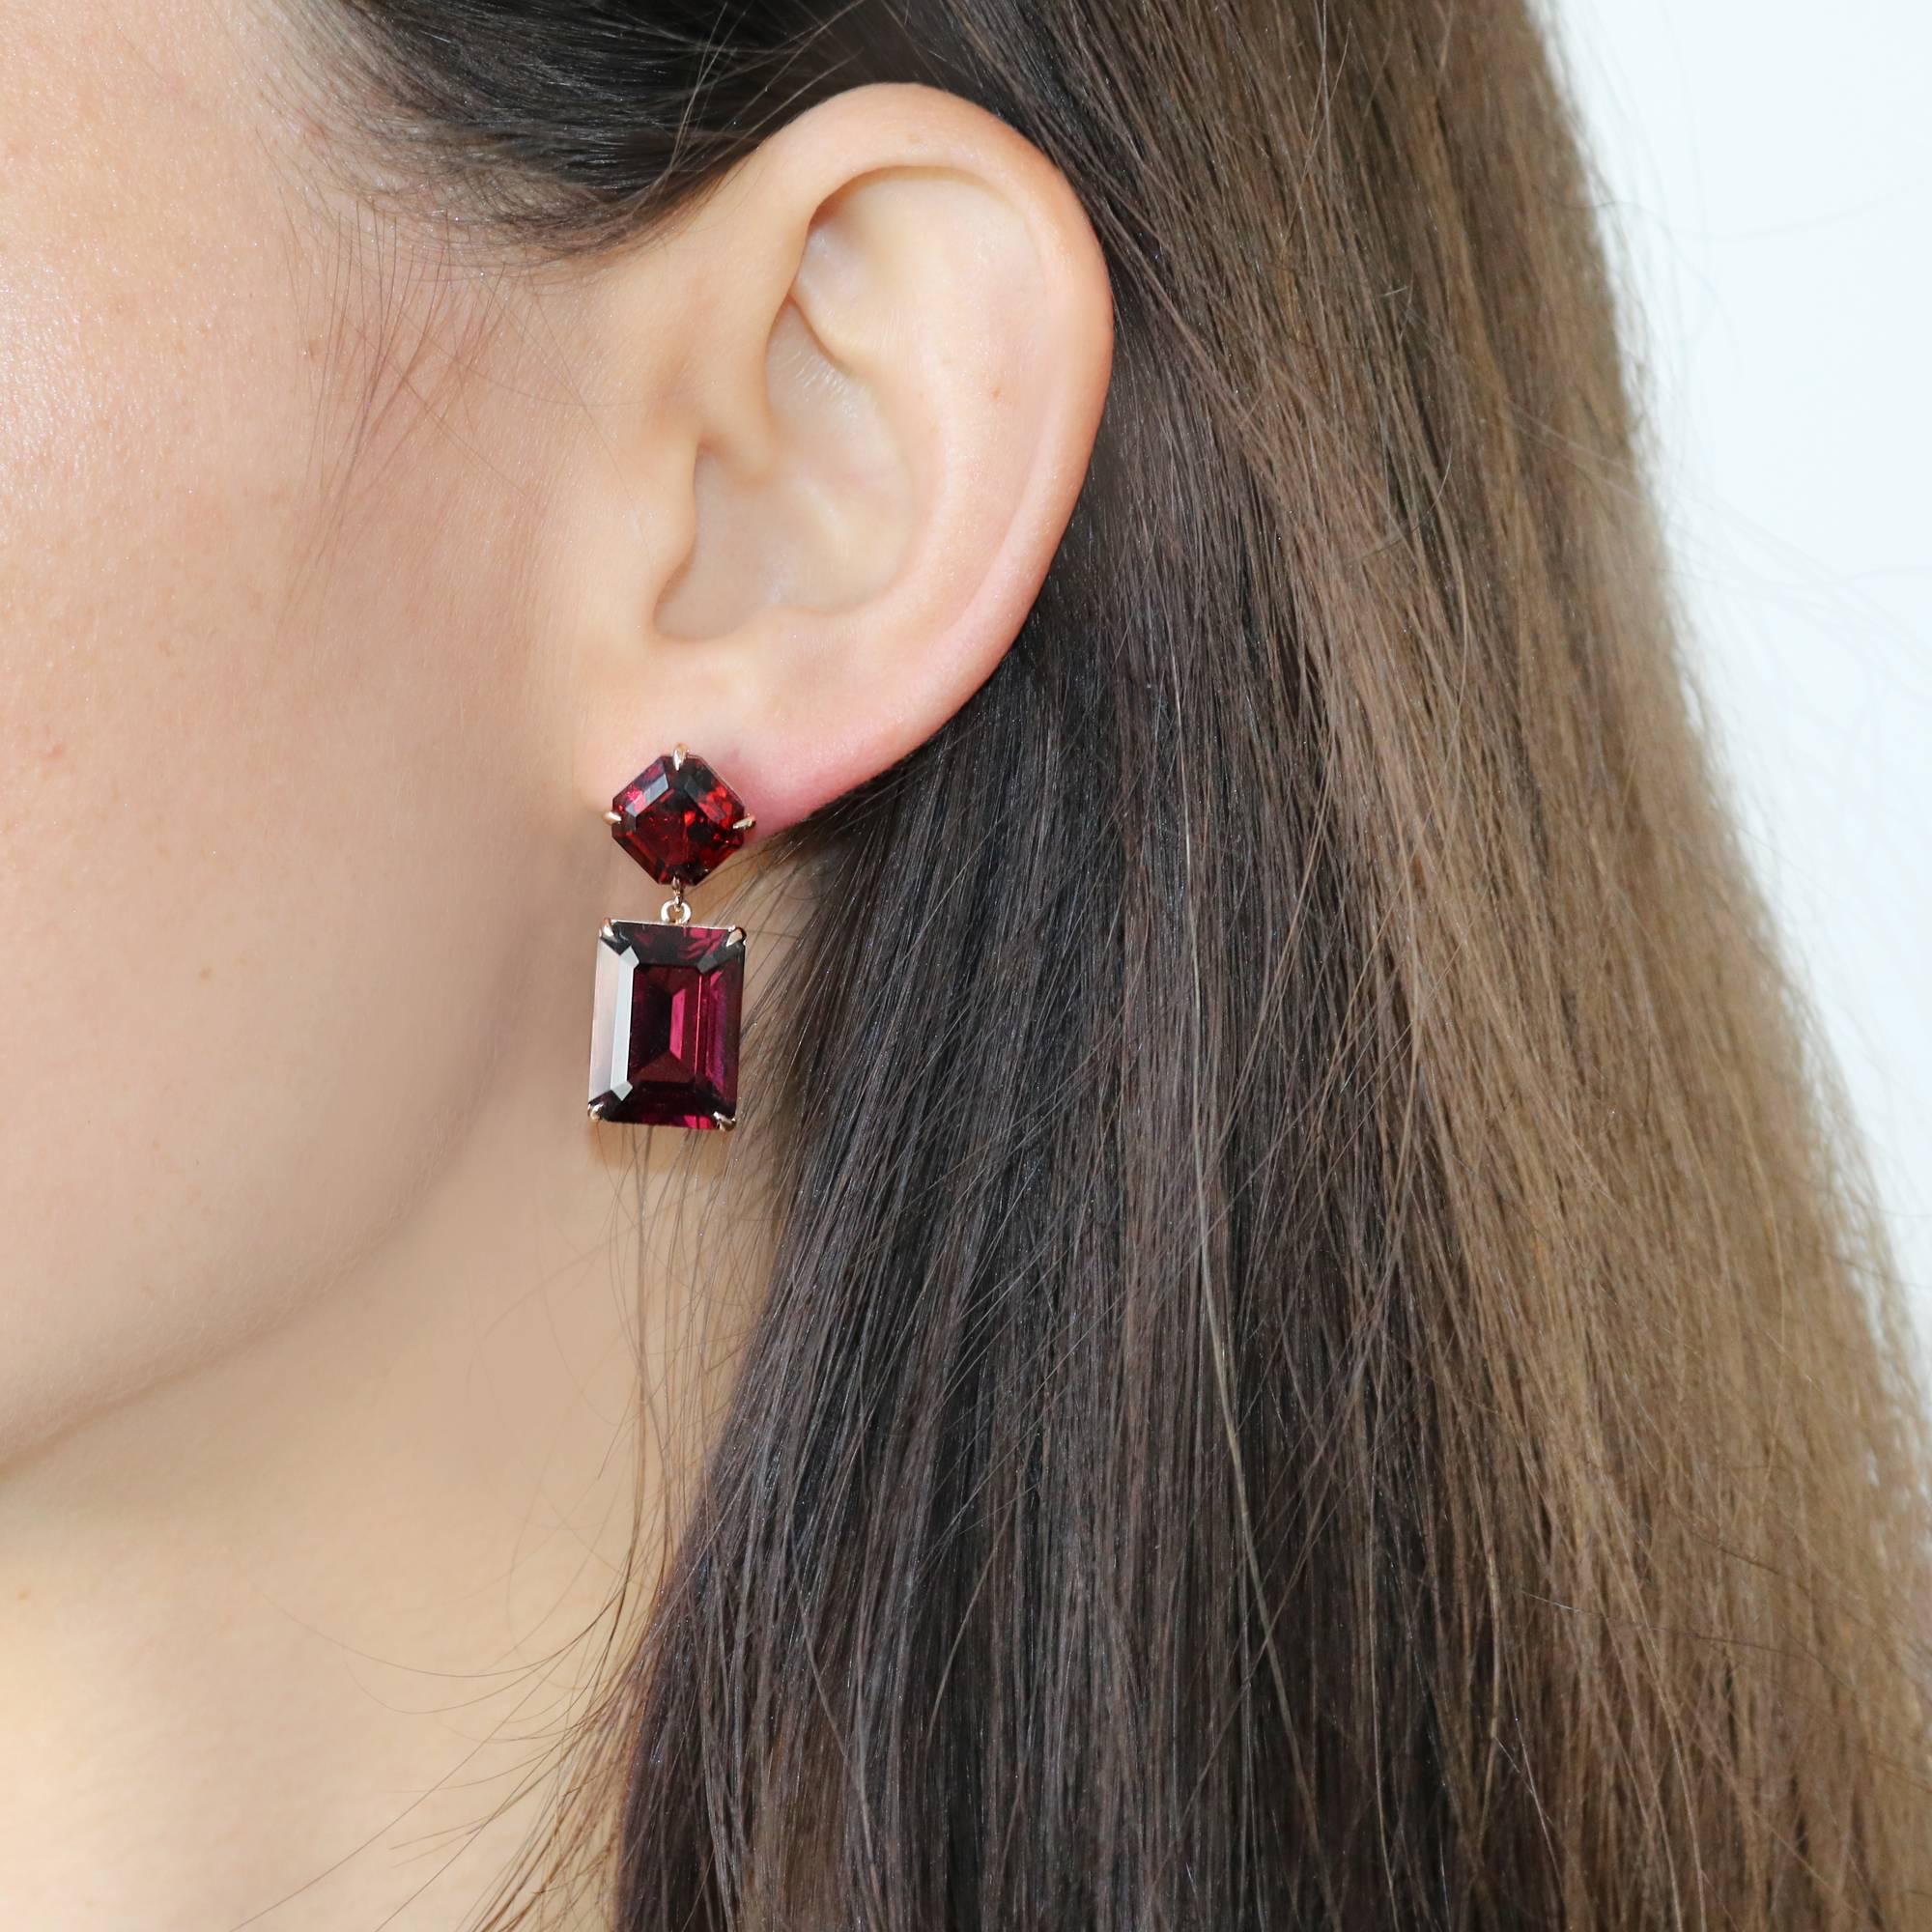 One of a kind emerald cut rhodolite garnet 14.88 carat earrings set in 18kt rose gold.

Clean lines, warm colored natural gemstones, and ideal cutting make this pair of all-day Rhodolite Garnet earrings a delight for the wearer.

The weight of each